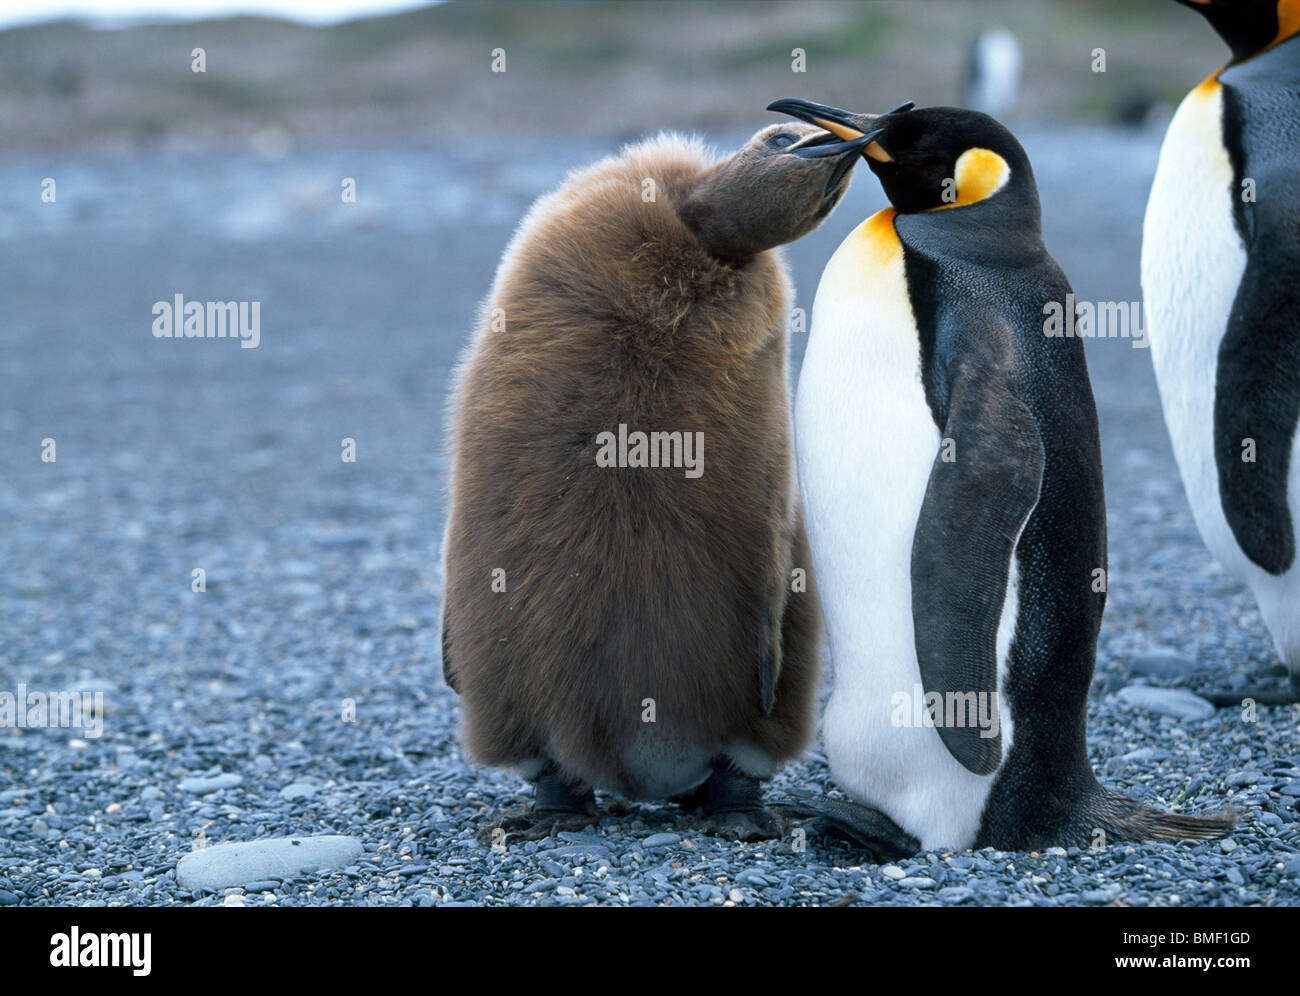 King penguin chick begging food from parent, St Andrew's Bay, South Georgia Stock Photo